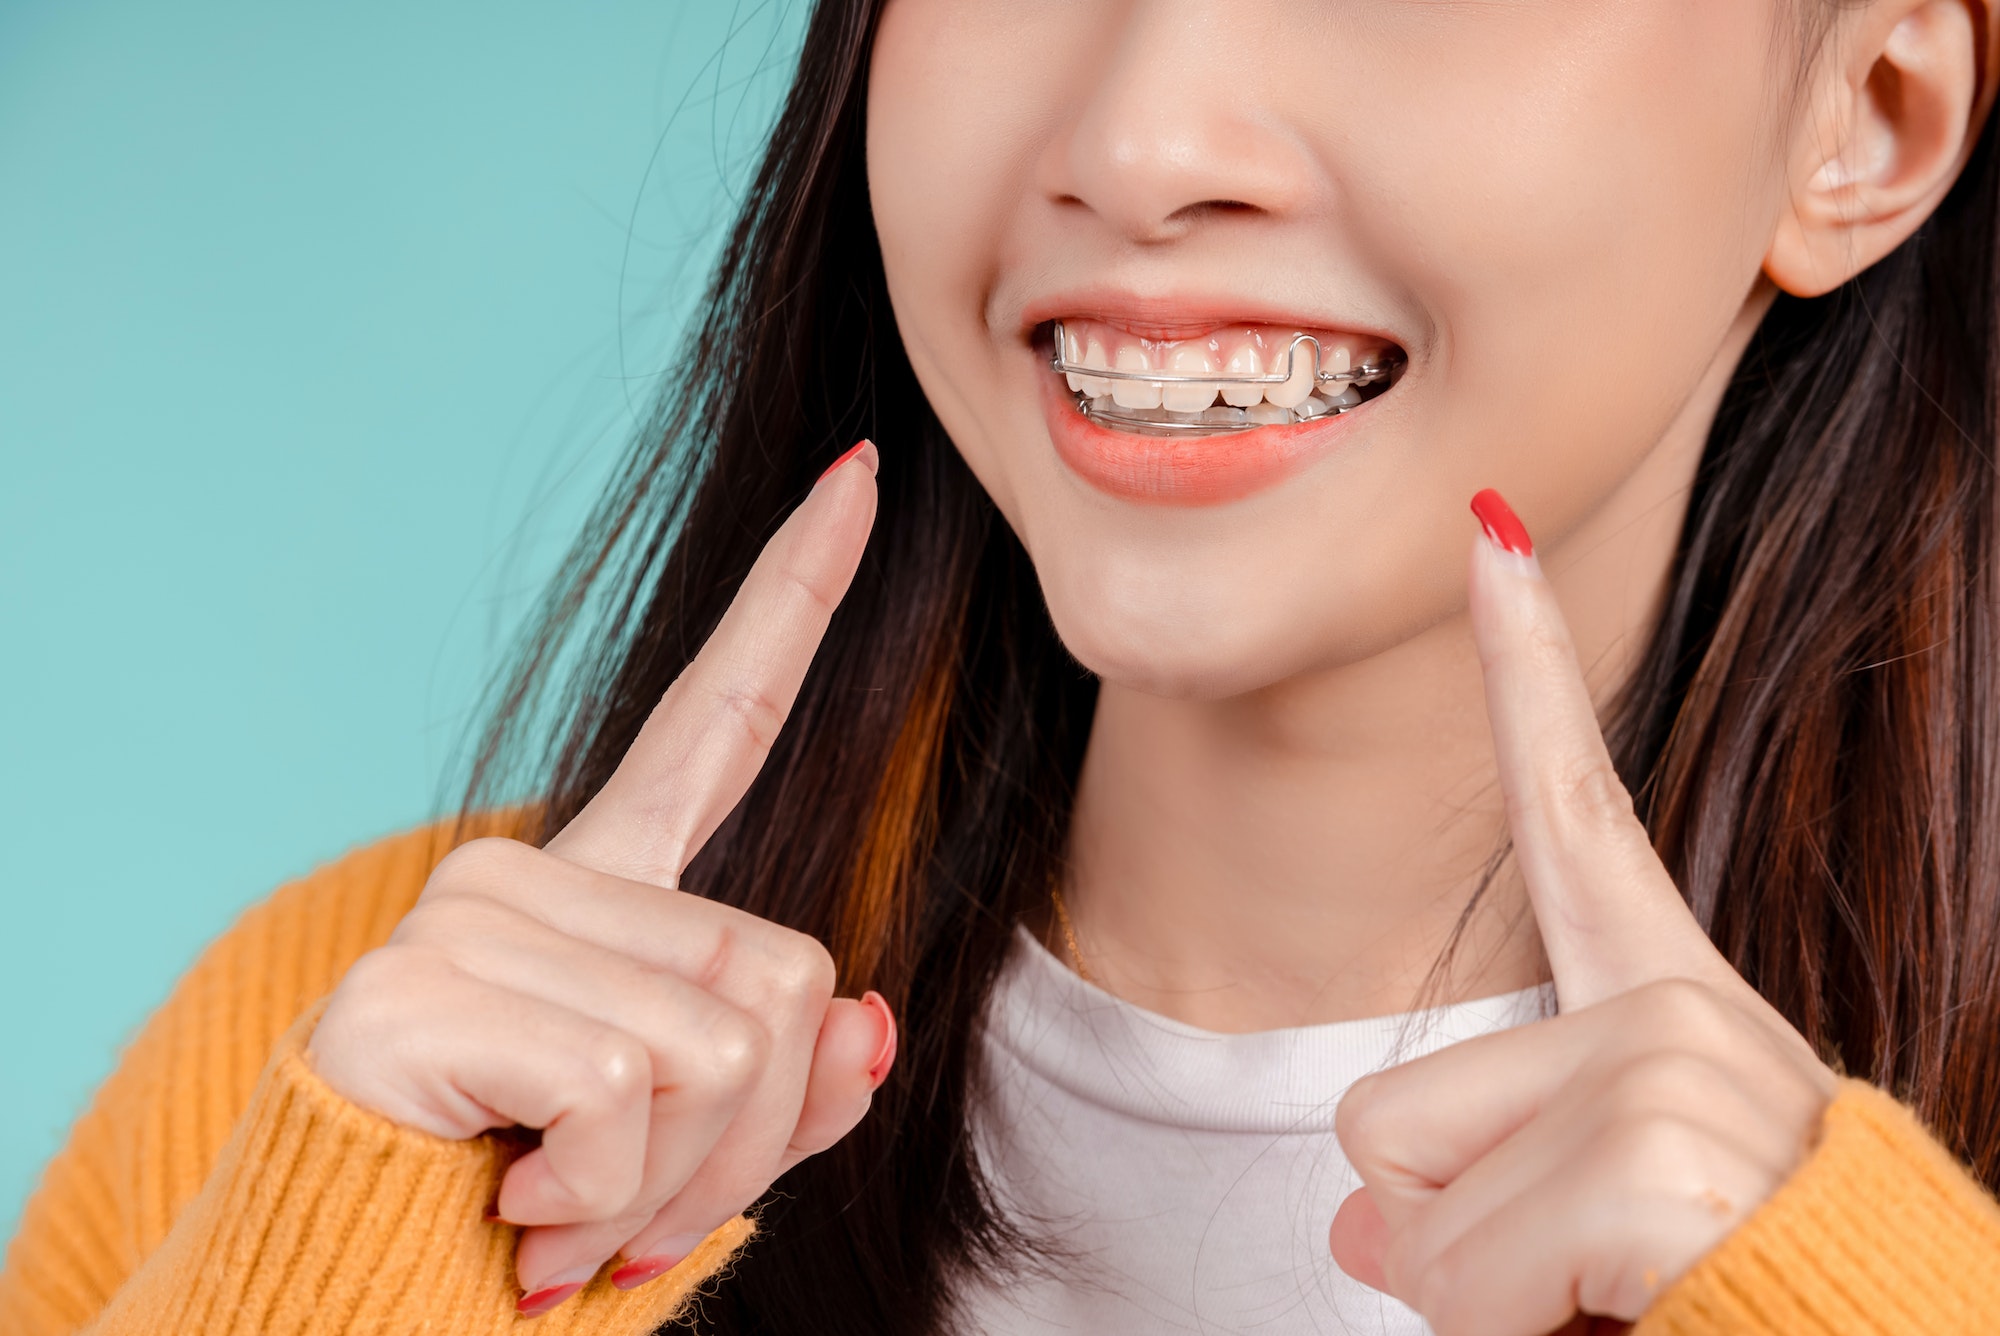 Dental Beautiful smiling of young asian woman with retainer braces